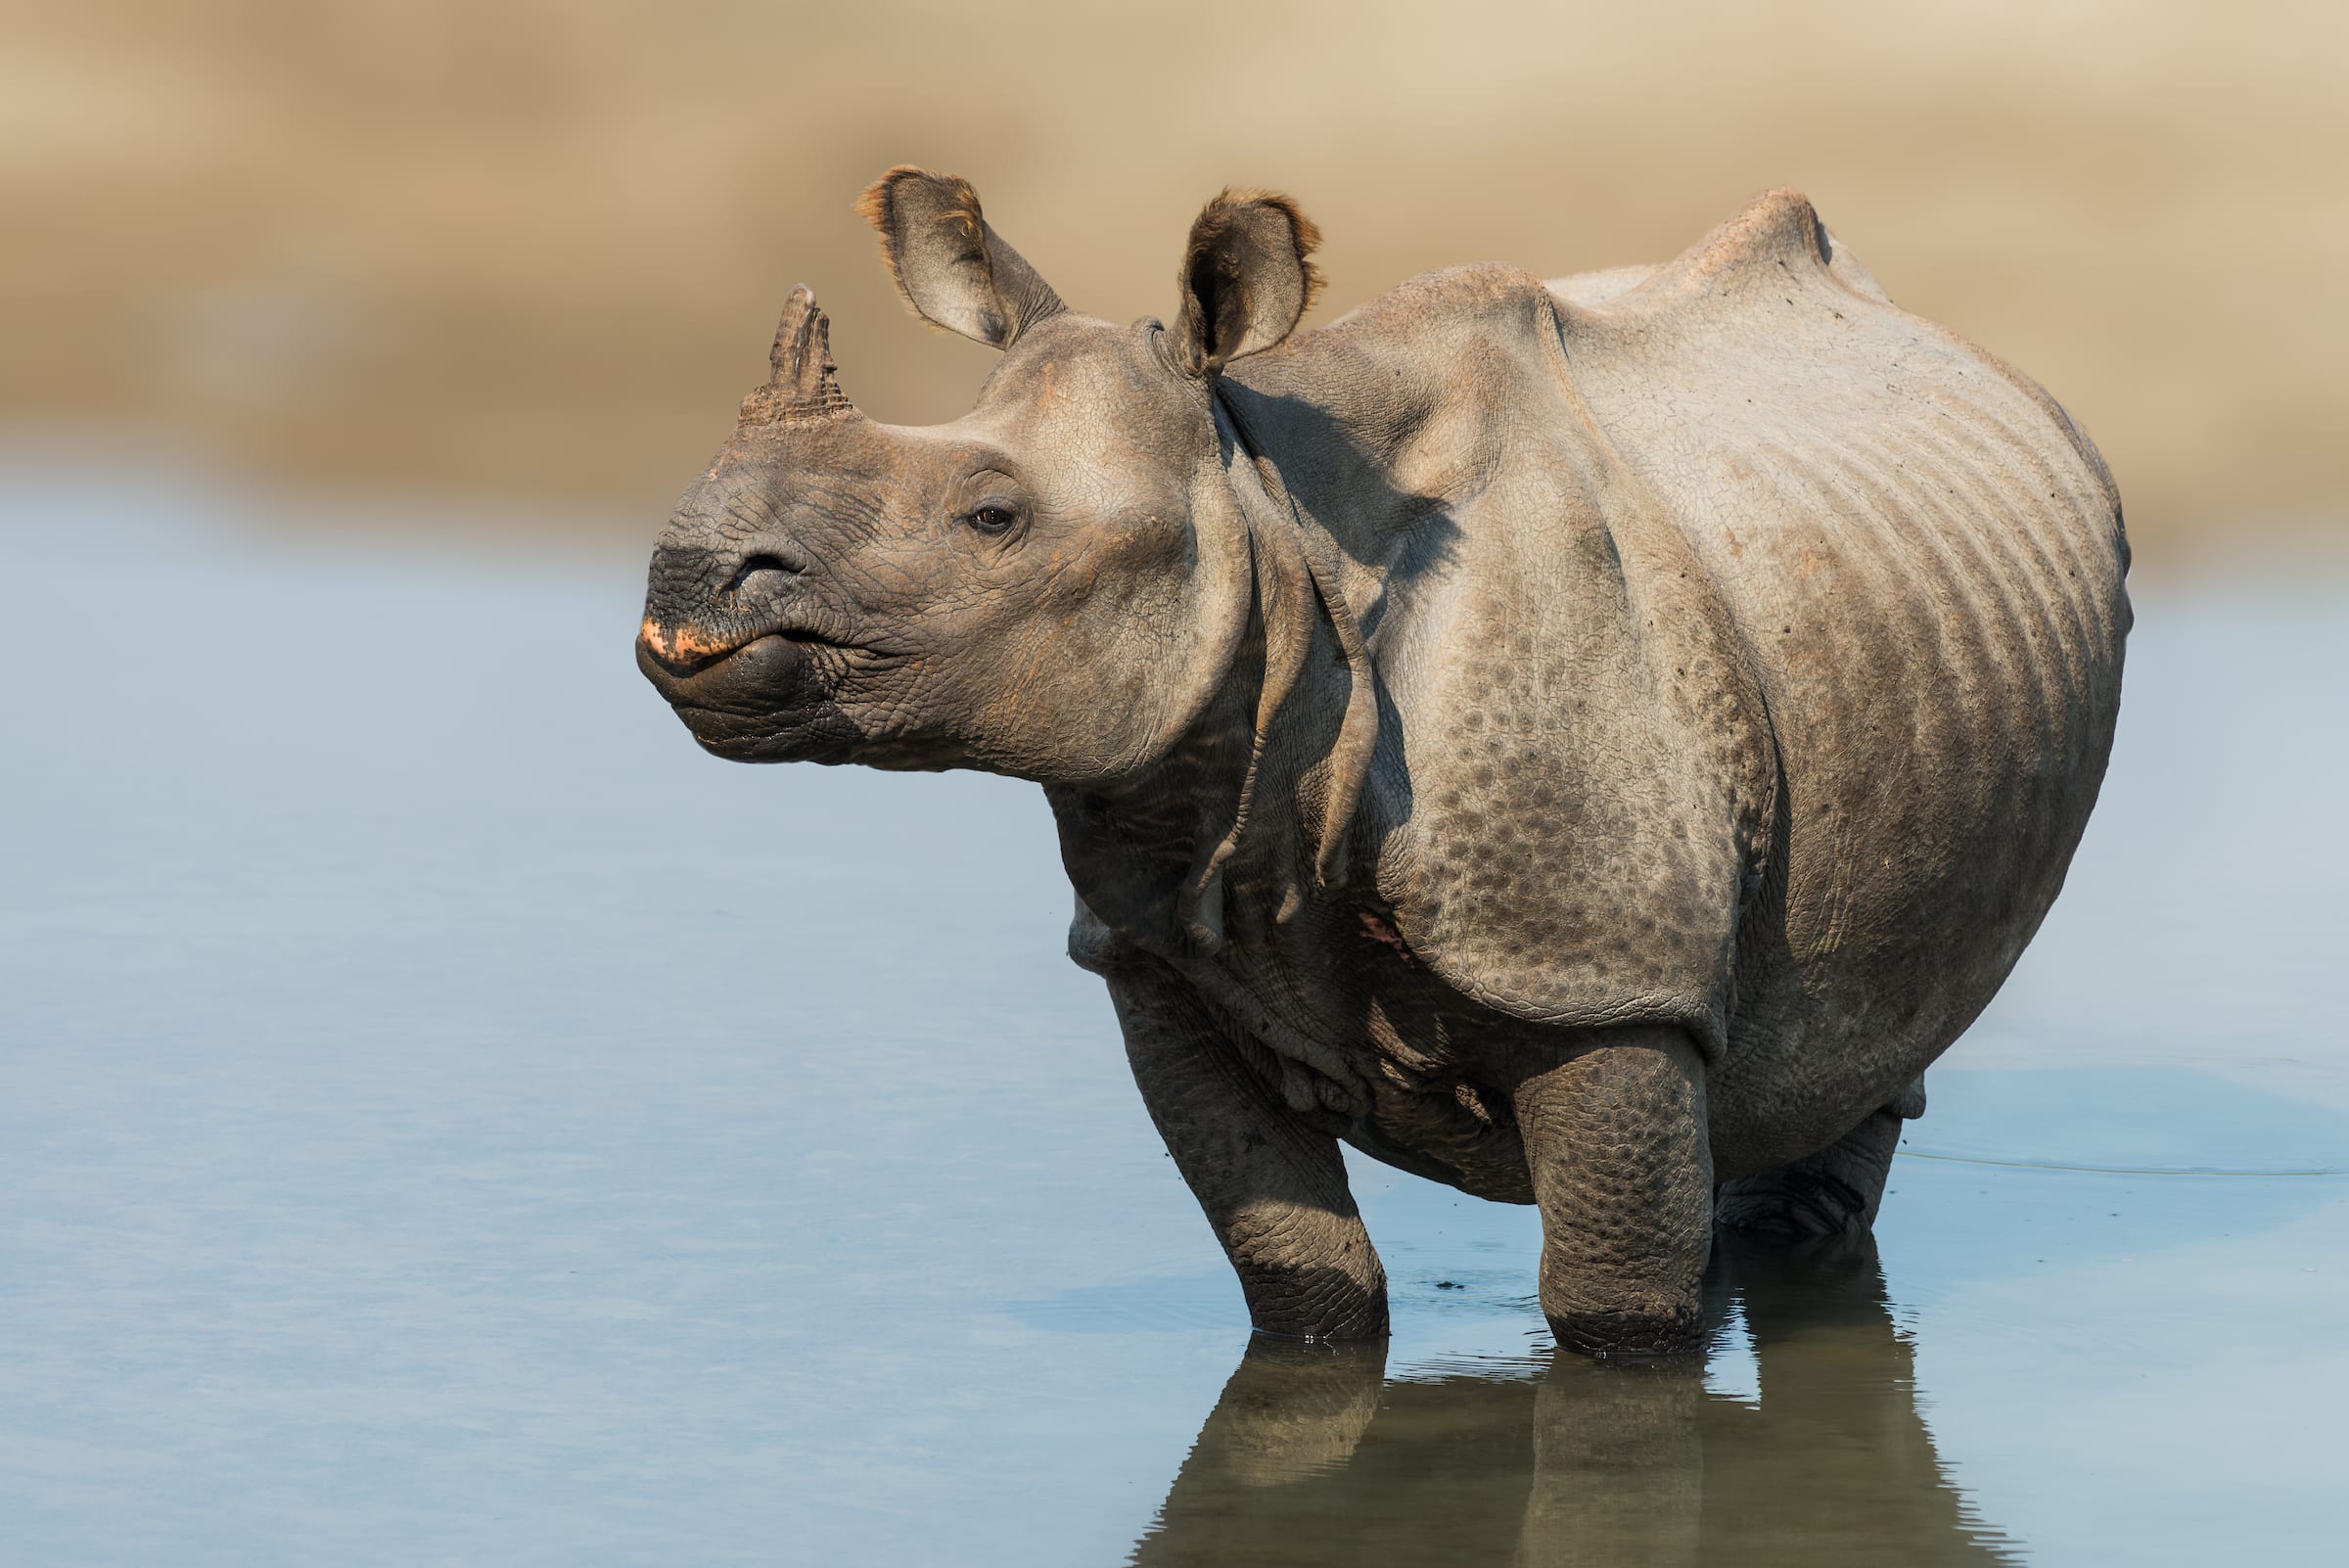 Greater one-horned rhino in Nepal